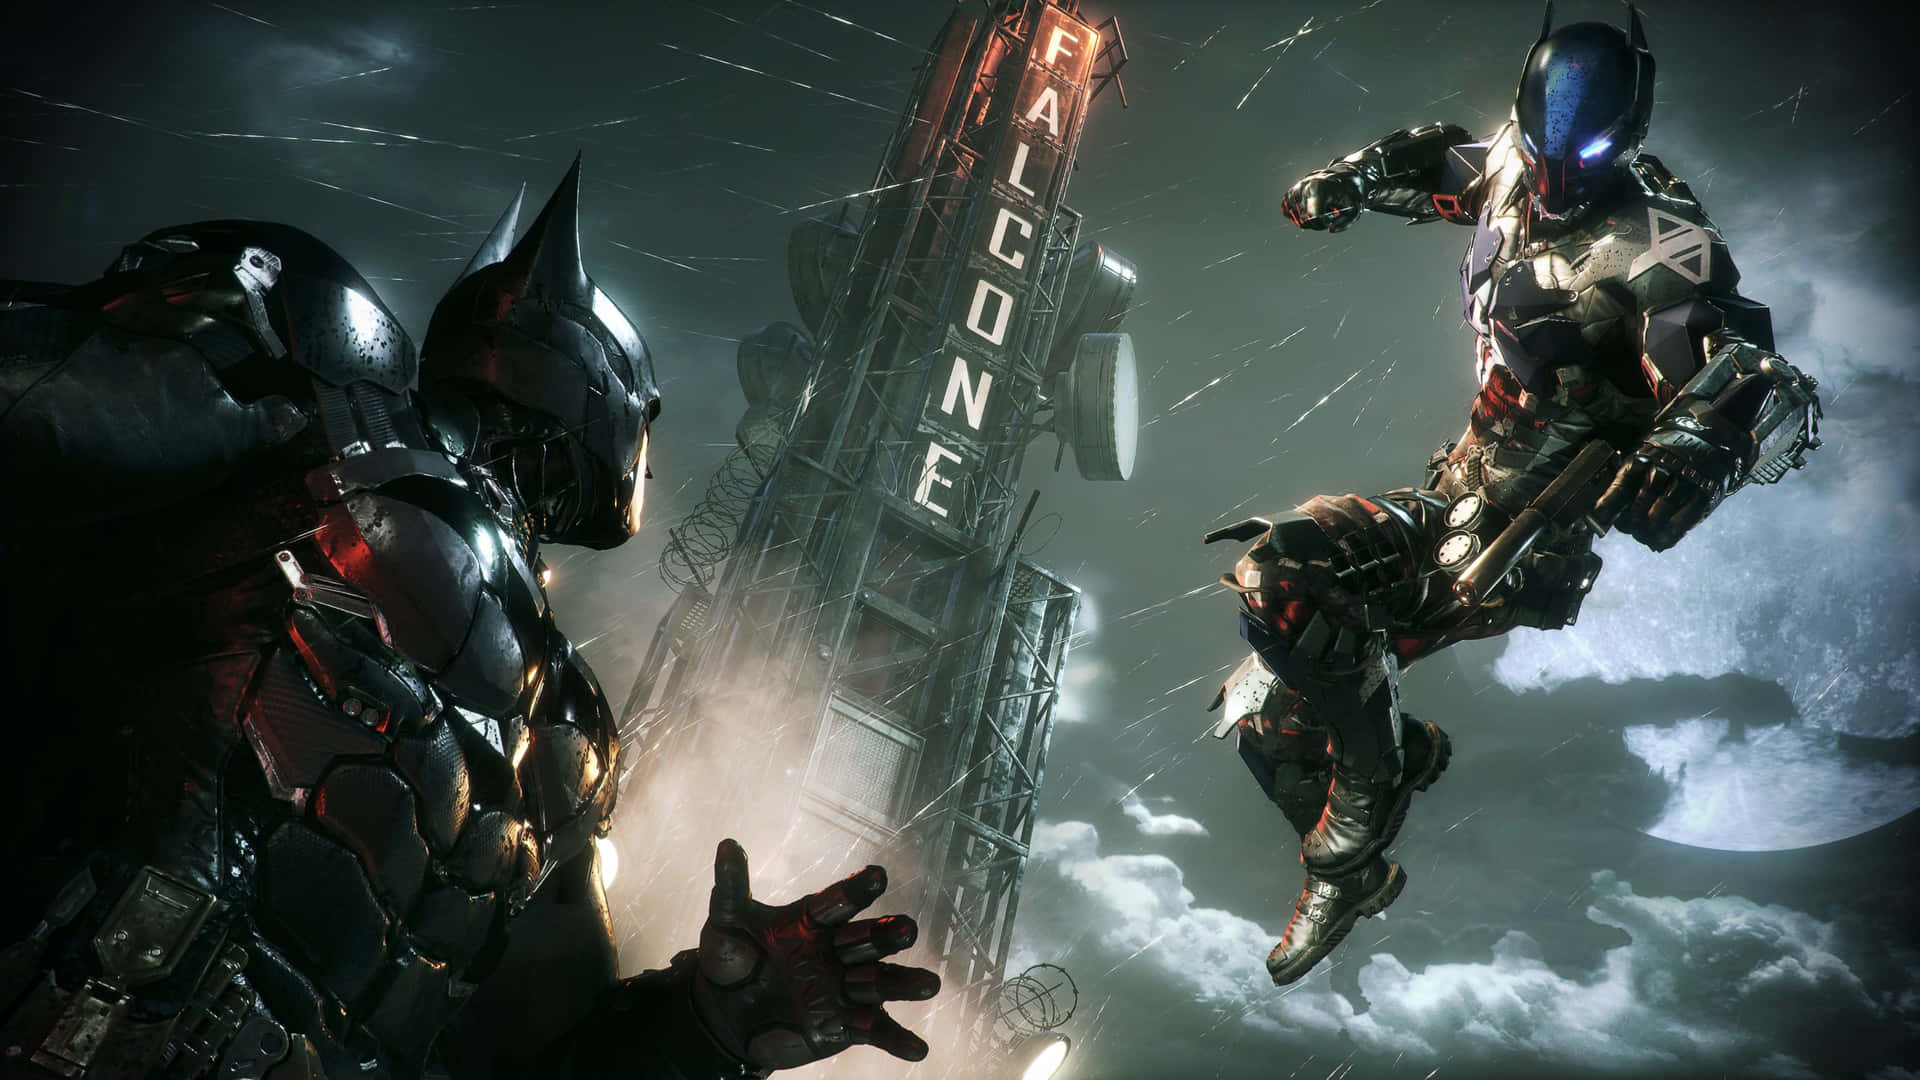 Be the Bat with Arkham Knight in 4K UHD Wallpaper